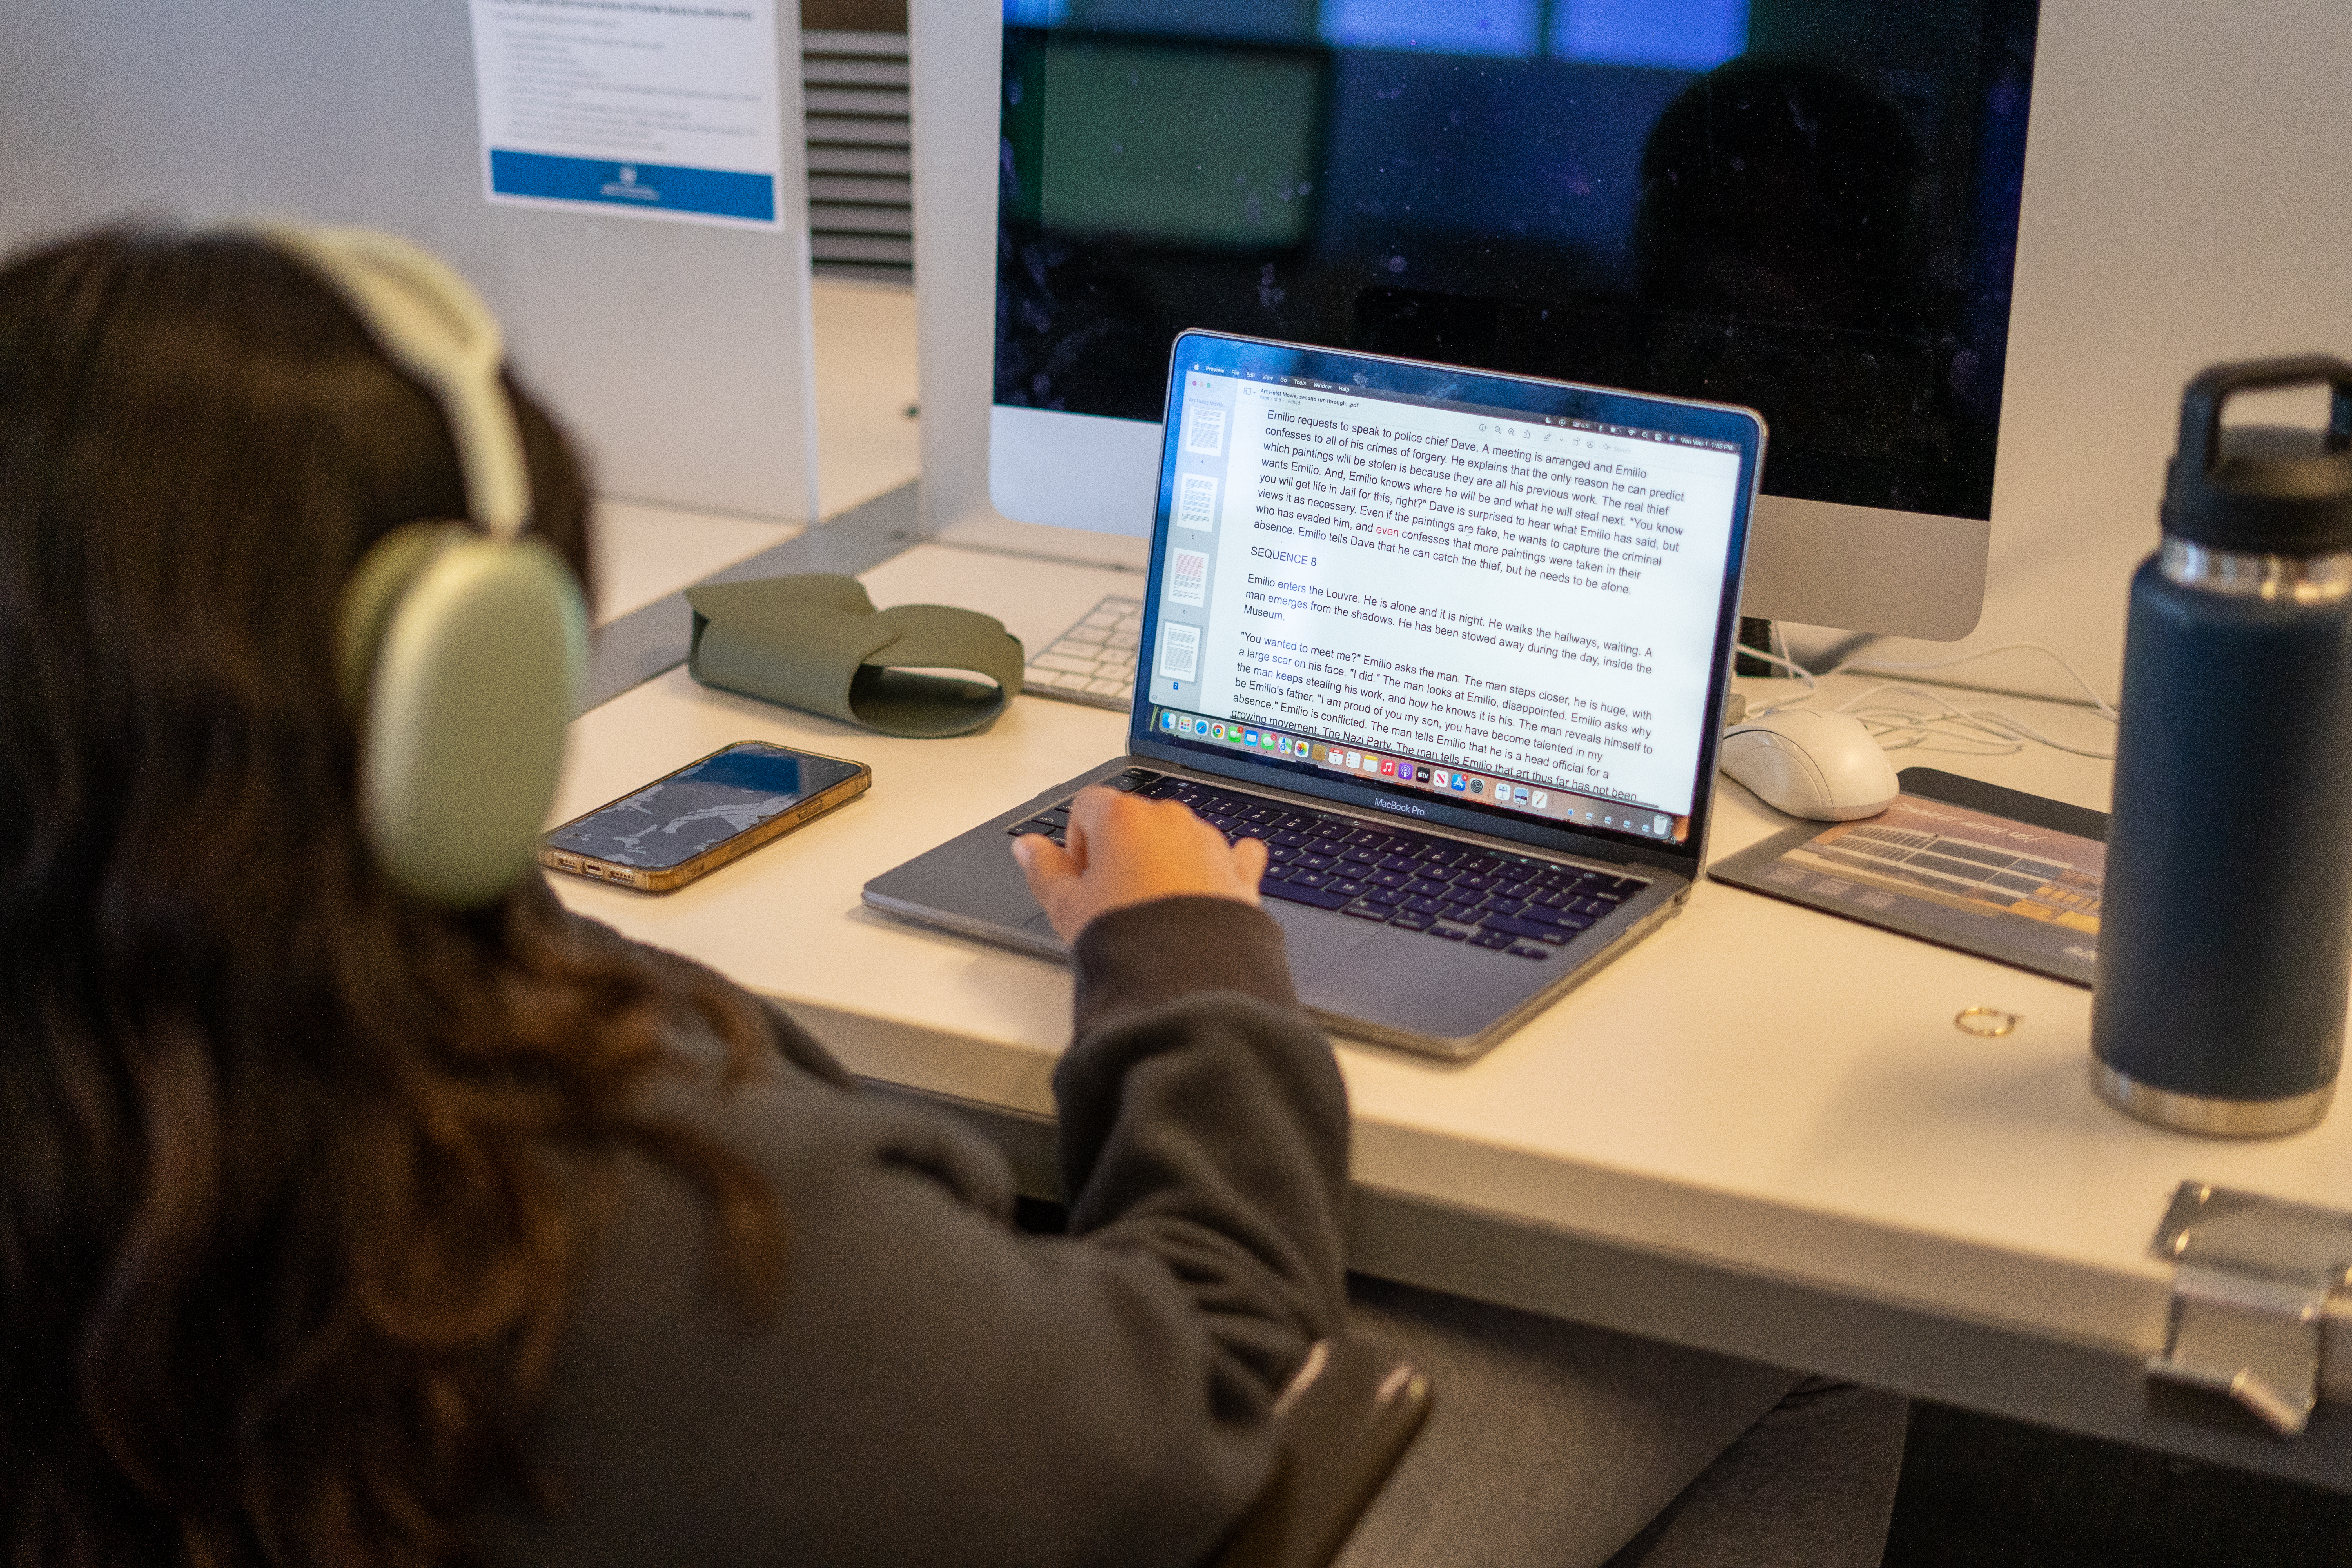 A student wearing headphones sits in front of a laptop.